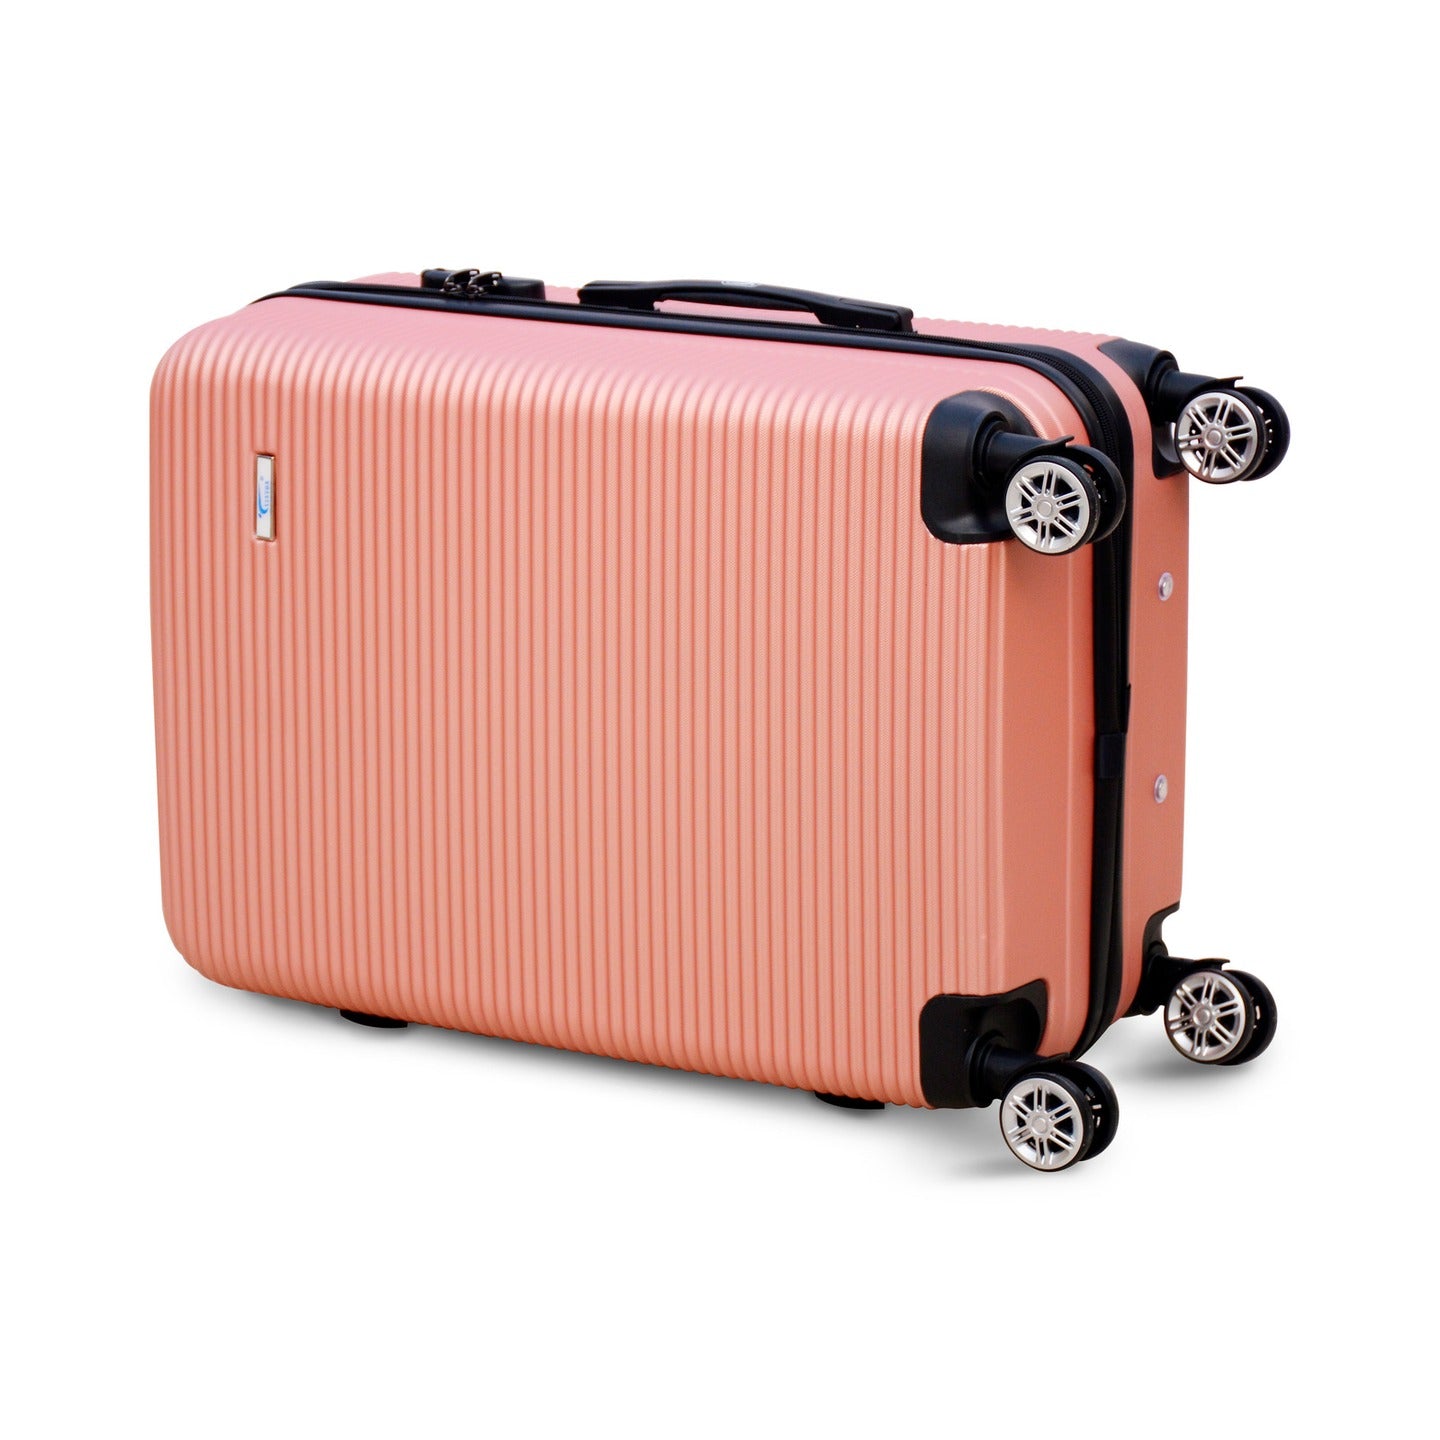 3 Piece Set 20" 24" 28 Inches Dark Pink Colour JIAN ABS Line Luggage lightweight Hard Case Trolley Bag With Spinner Wheel